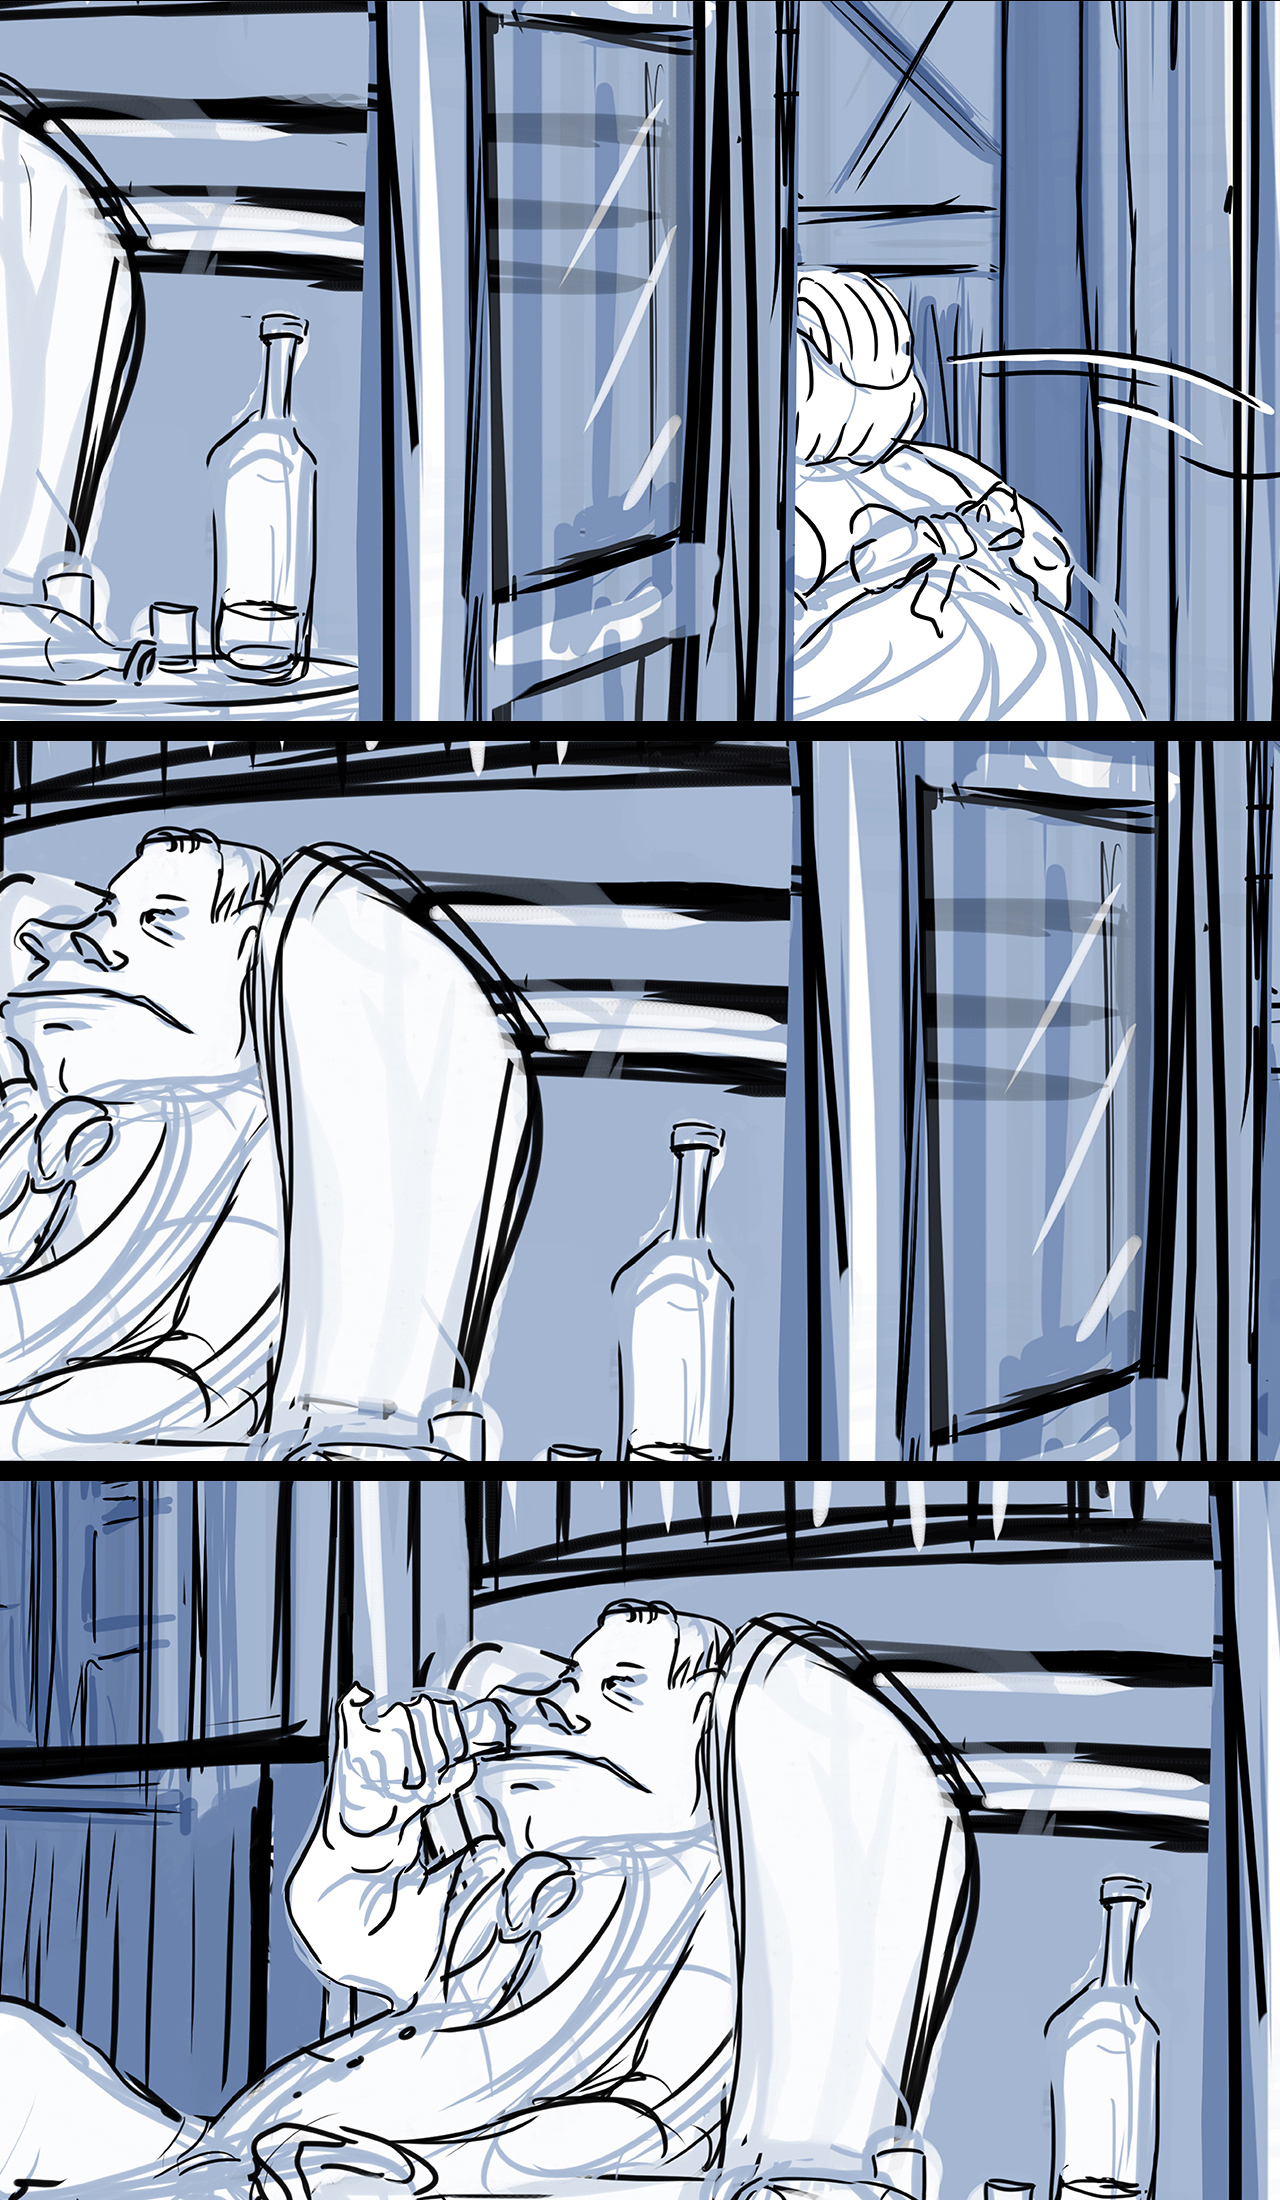 Storyboard sequence from an animated film. Sequence shows continuation of a woman walking past a pair of french doors.  The camera follows her past a big man sitting in an arm chair and drinking.